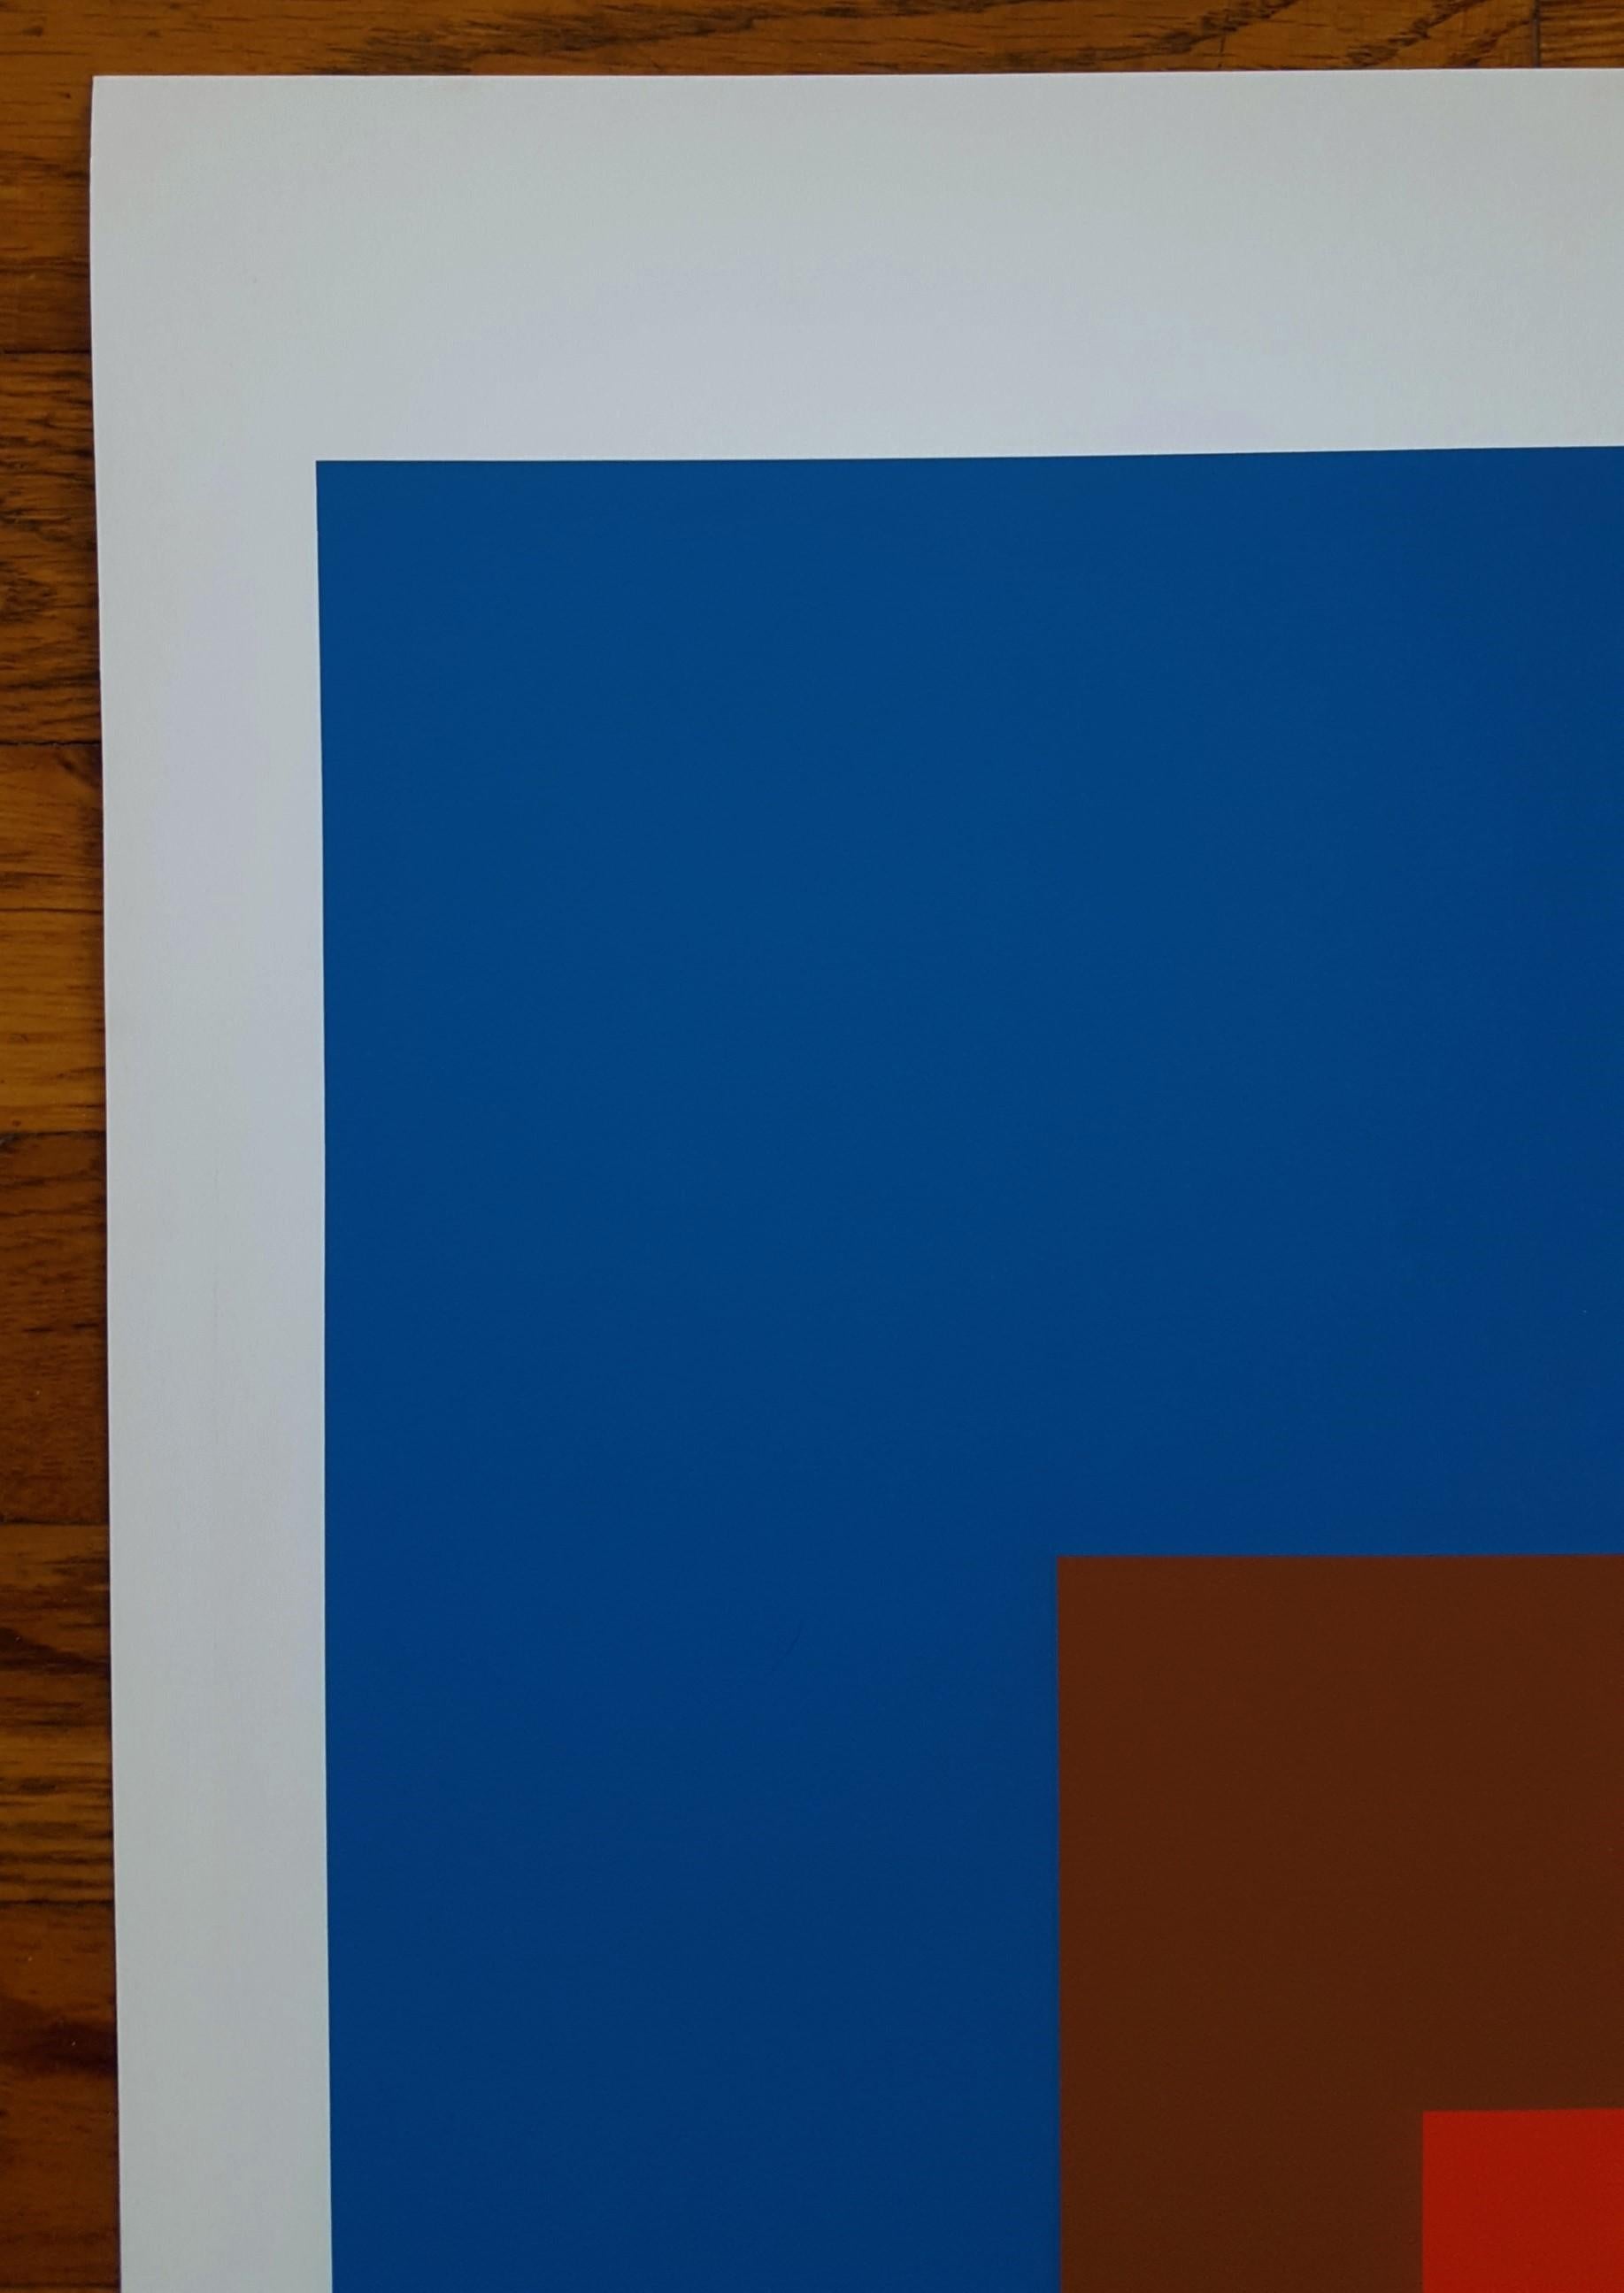 Josef Albers: A Retrospective - Blue Abstract Print by (after) Josef Albers